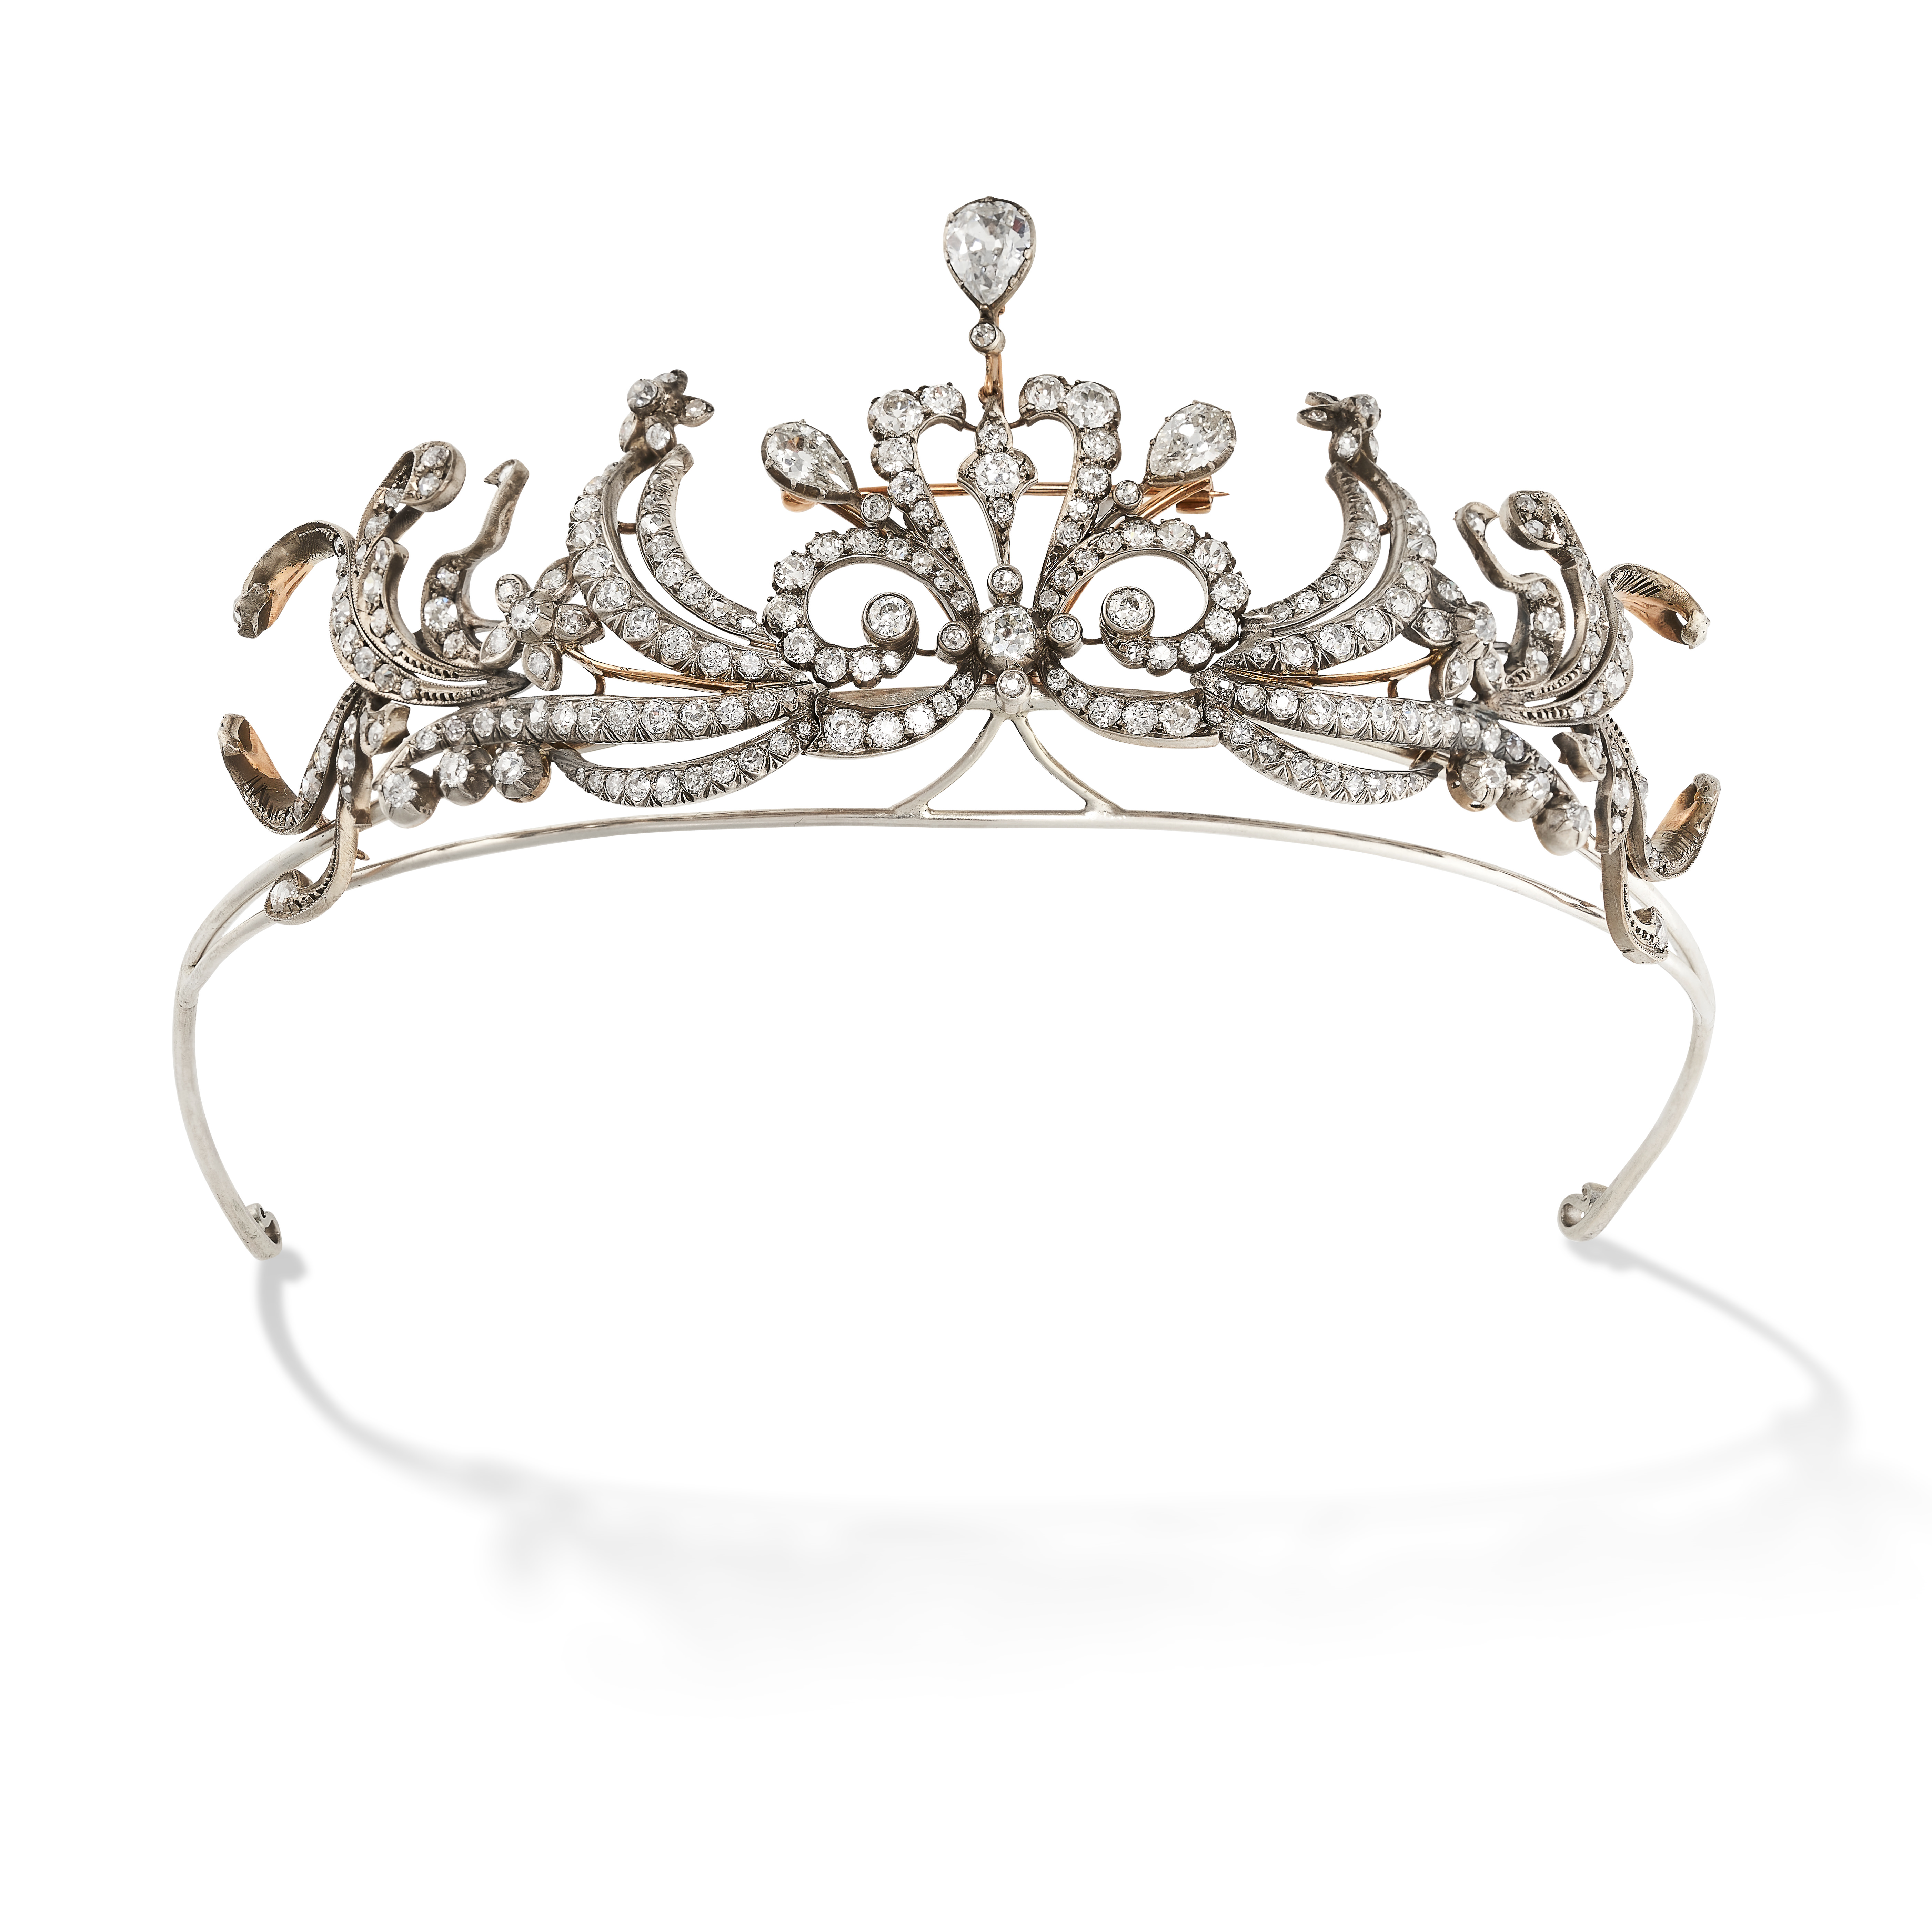 A FINE ANTIQUE DIAMOND TIARA in yellow gold and silver, the scrolling foliate body jewelled